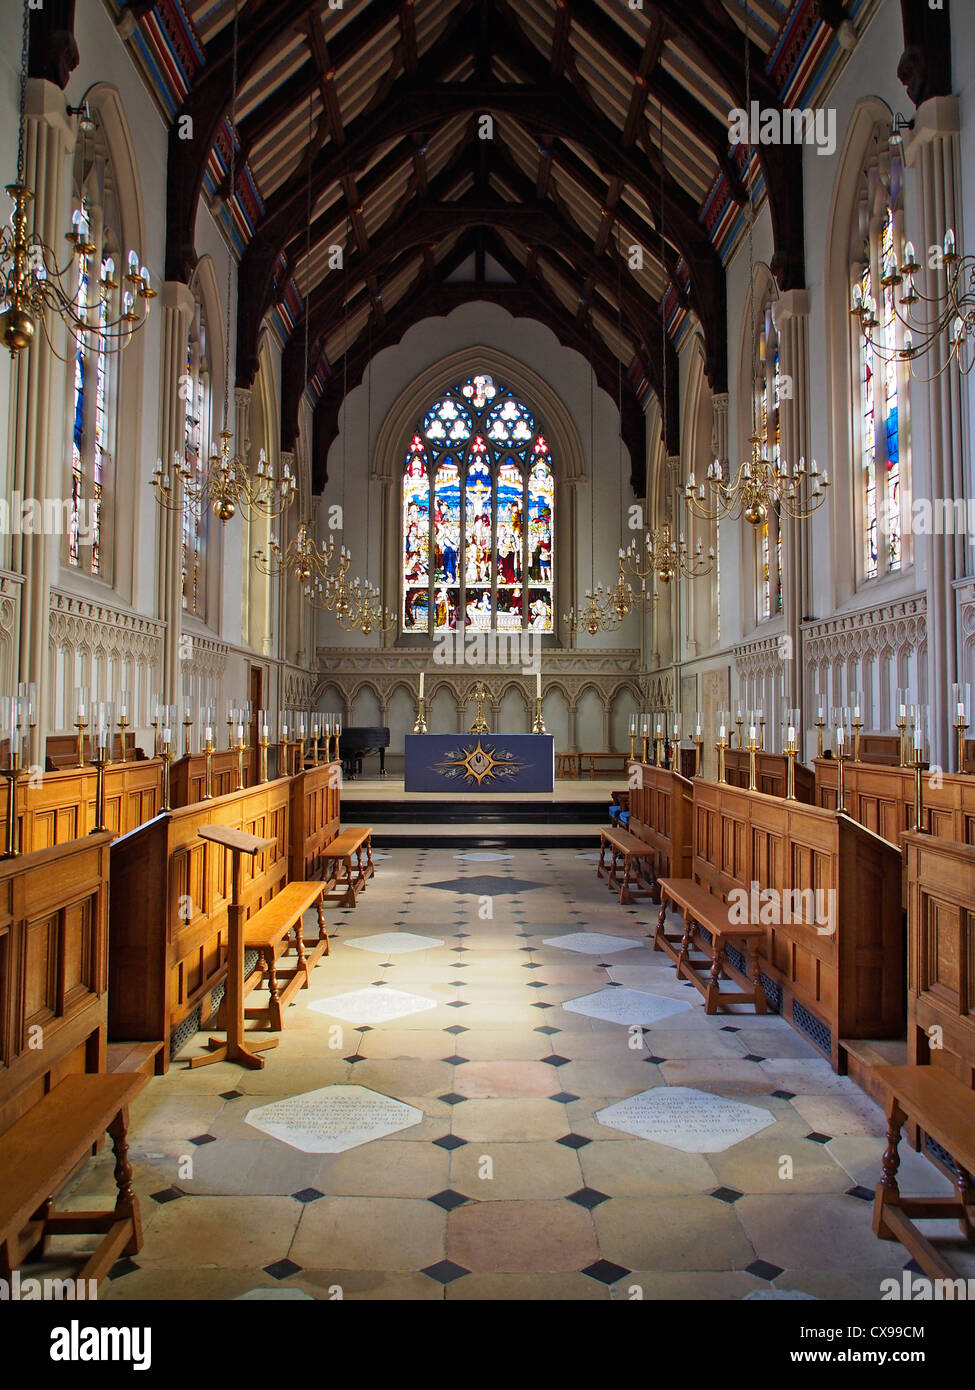 A portrait image showing the interior of the Chapel at Corpus Christi College in Cambridge with vaulted beamed ceiling and stain Stock Photo